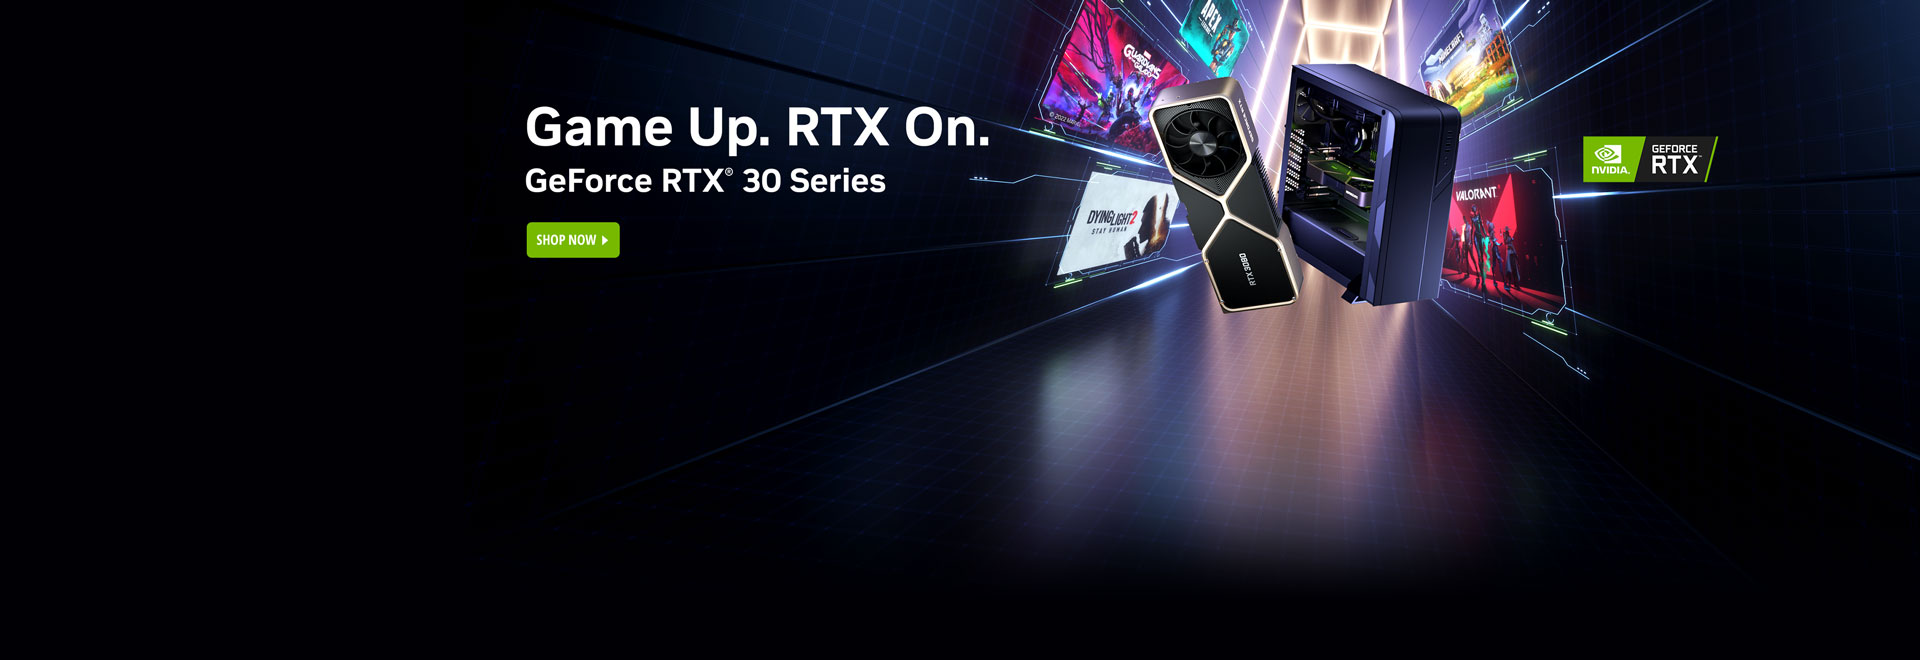 Game Up. RTX On